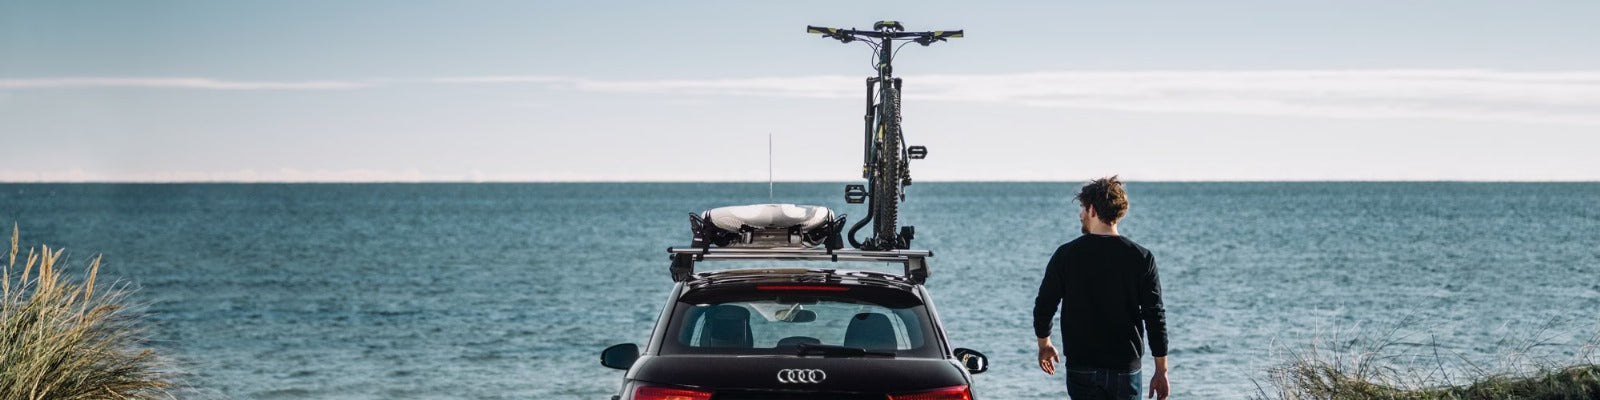 Thule Roof Racks: Elevating Your Transport Experience